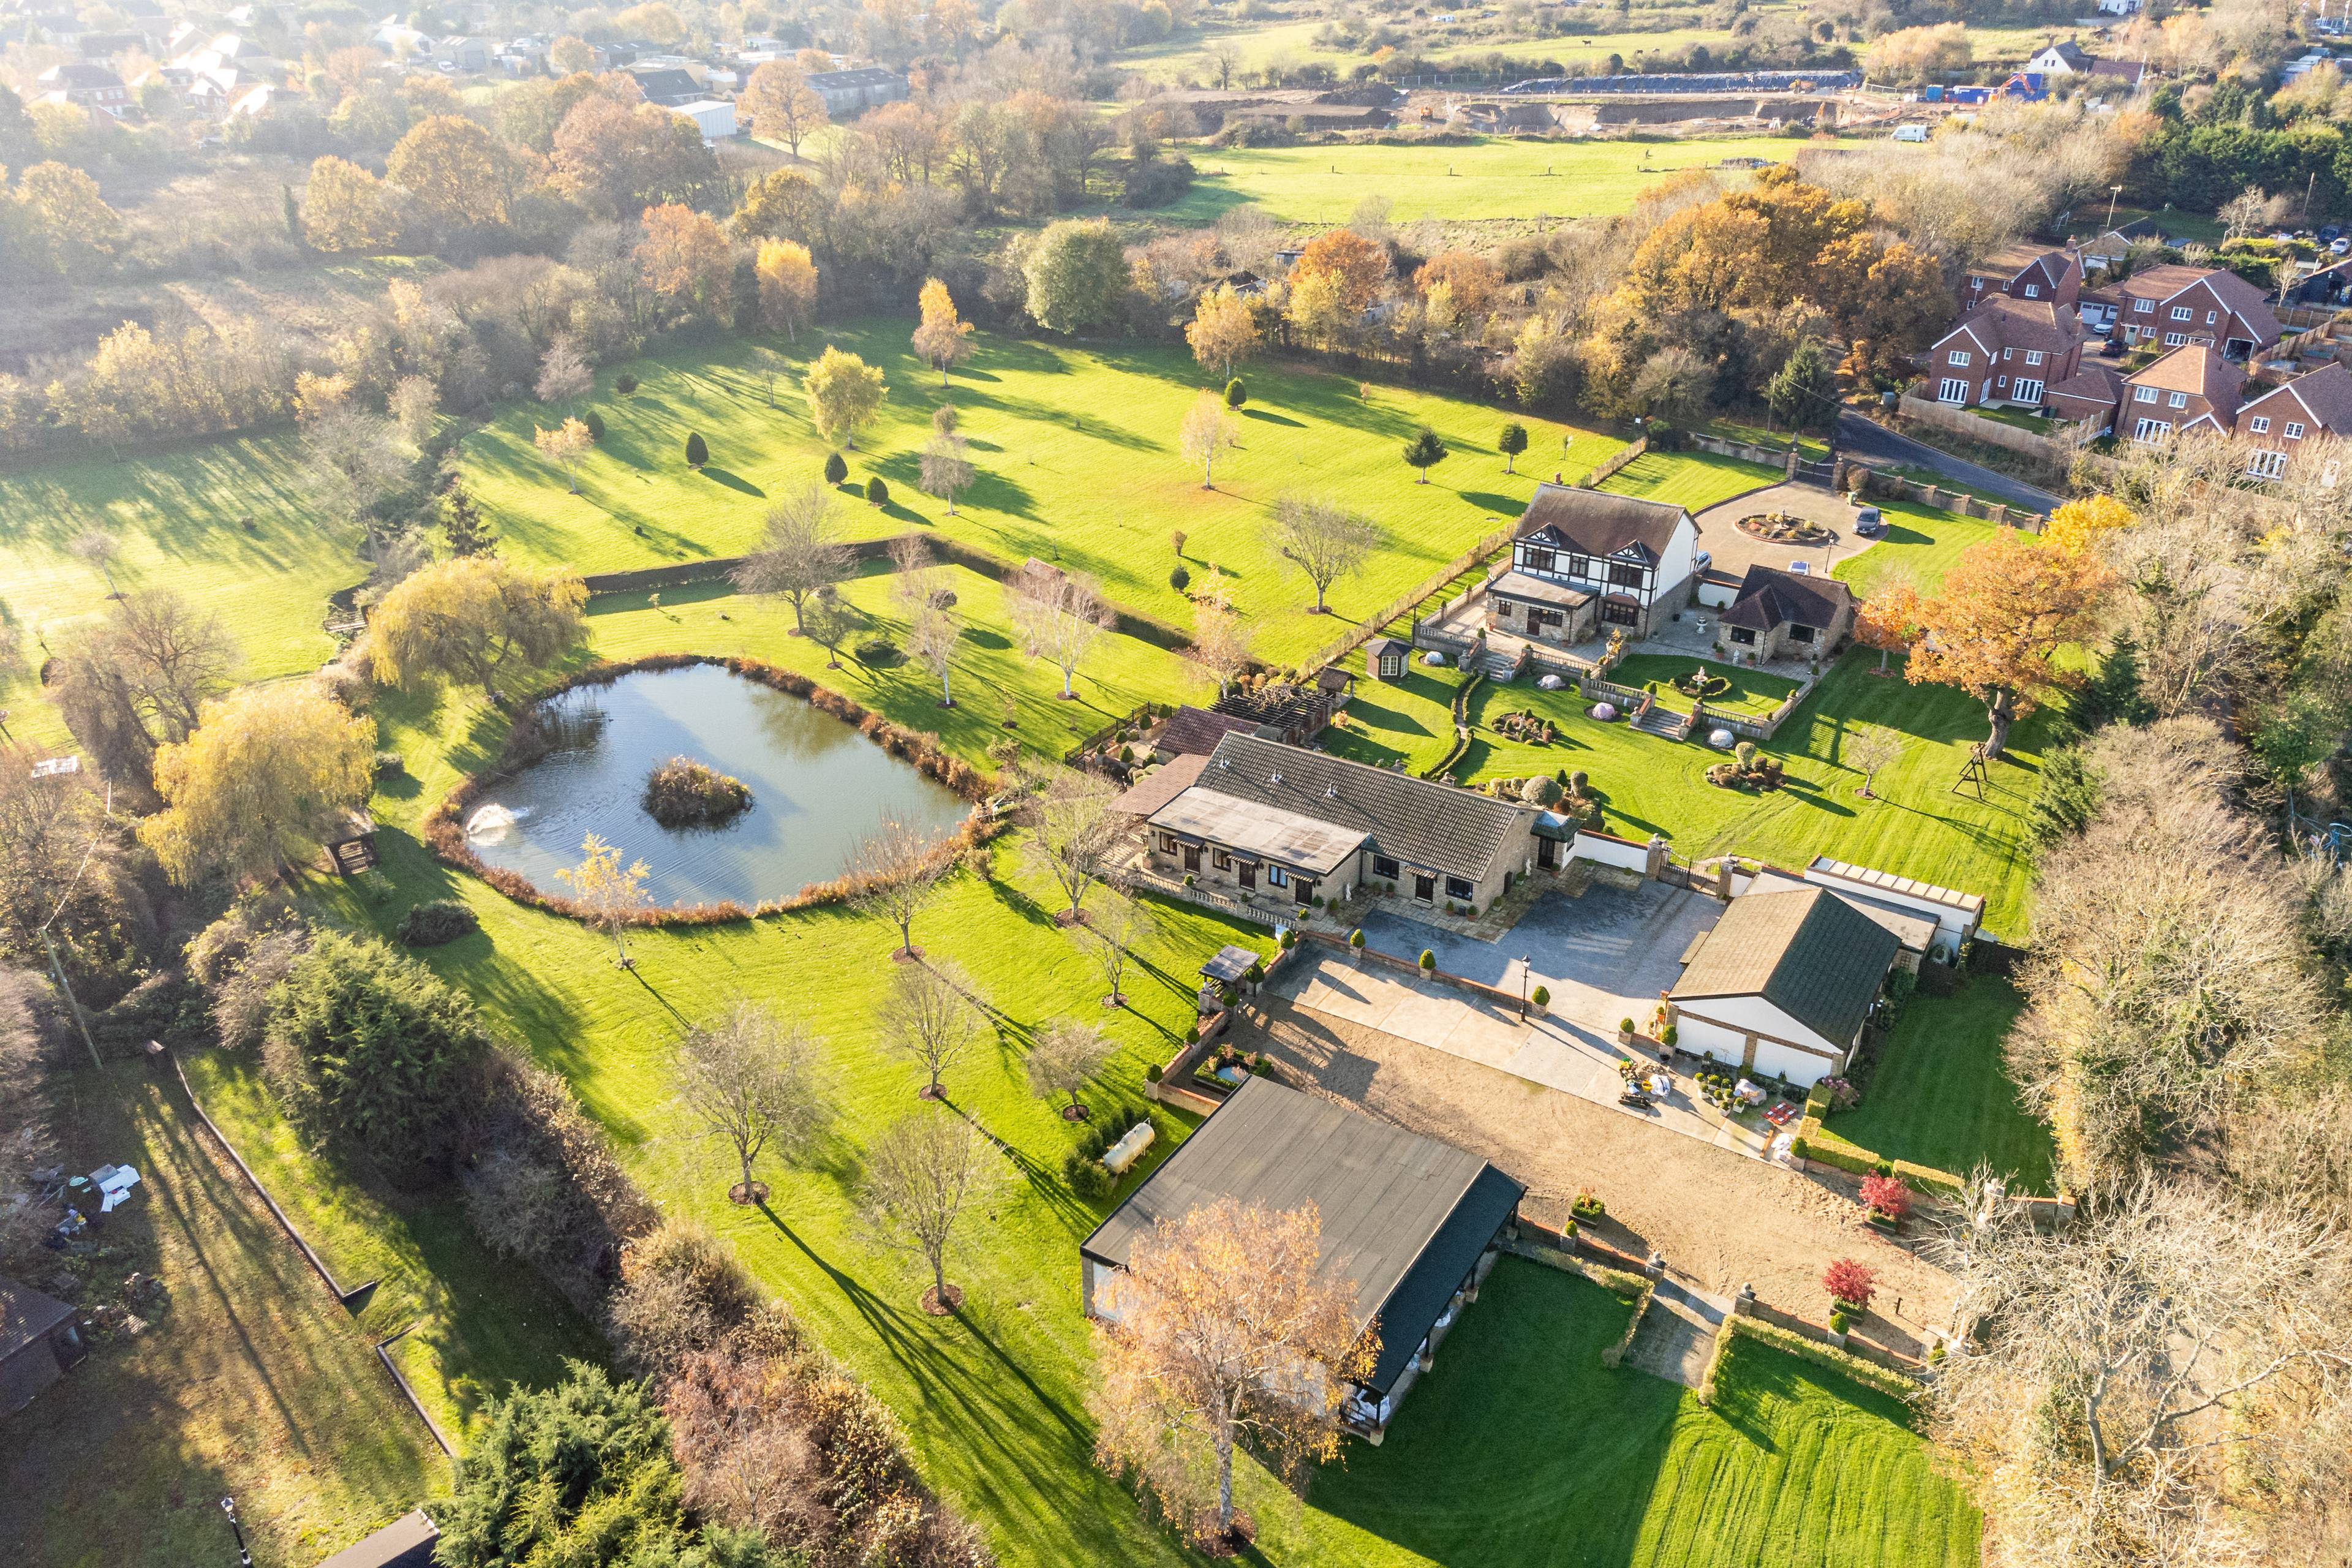 Nest Seekers International are proud to present Malaya Farm, a beautiful home set in just under 7 acres of grounds located in Goffs Oak, Hertfordshire